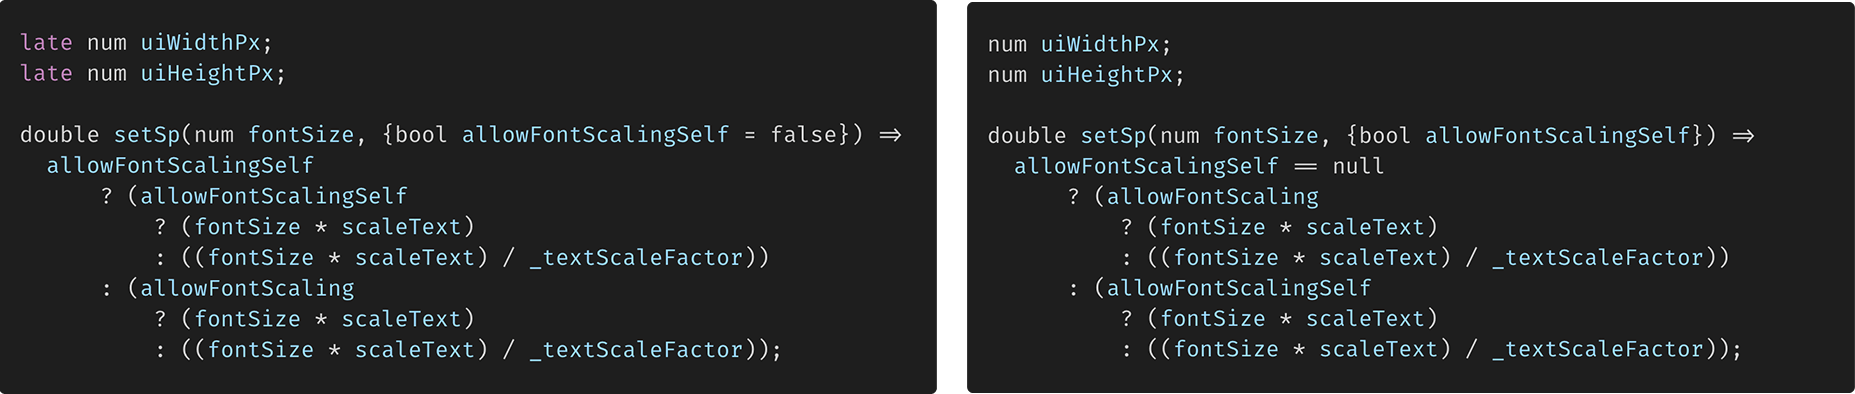 not_initialized_non_nullable_instance_field_screenutil_comparison.png